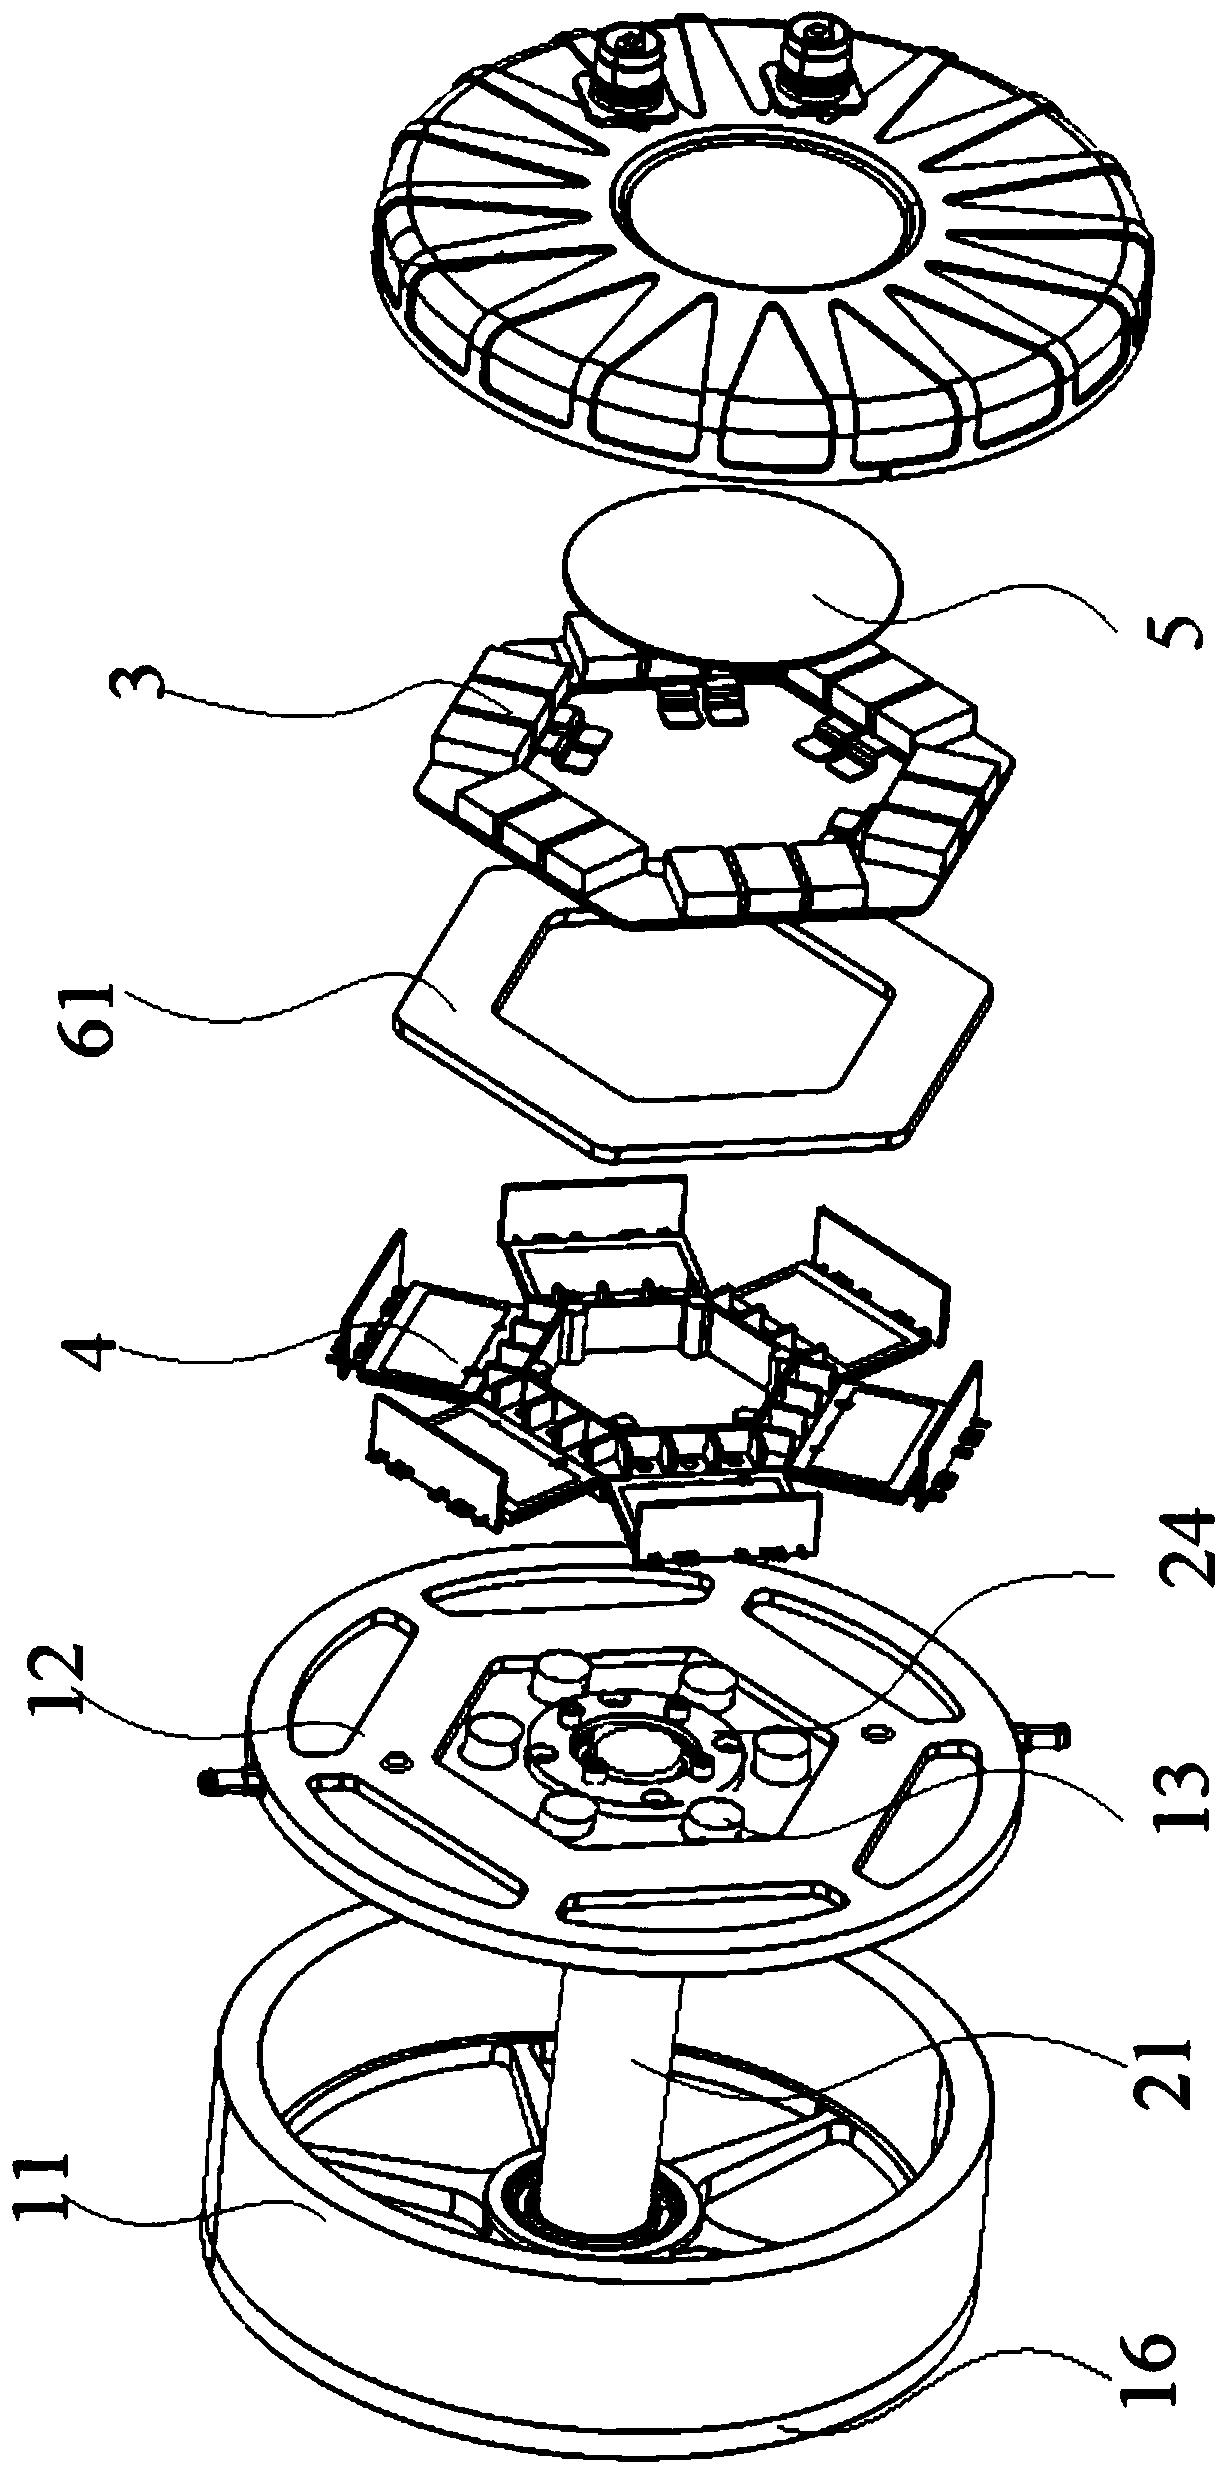 Motor and controller integrated system